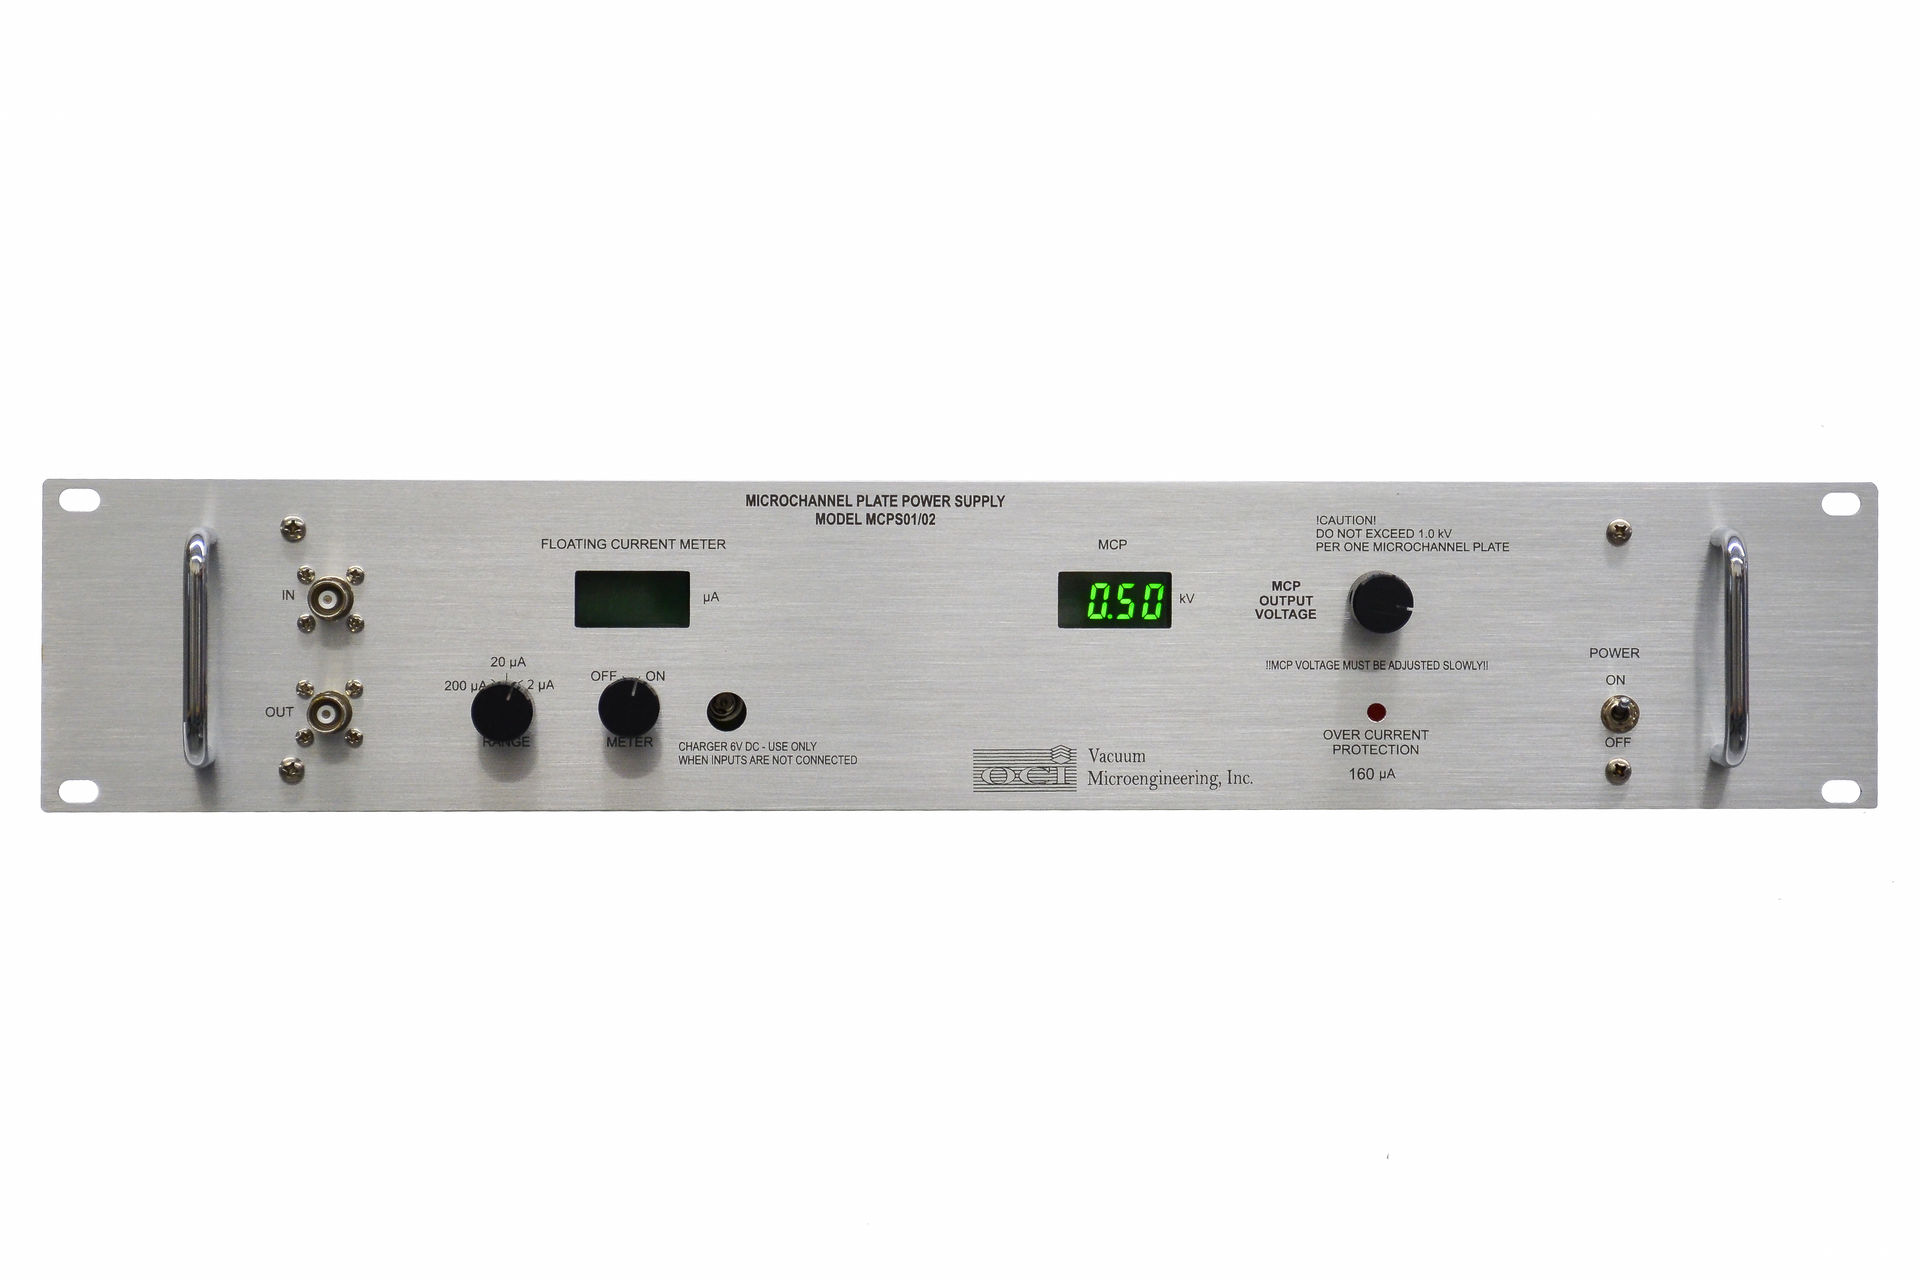 Figure 4. Model MCPS01/02 power supply for microchannel plate operation. 